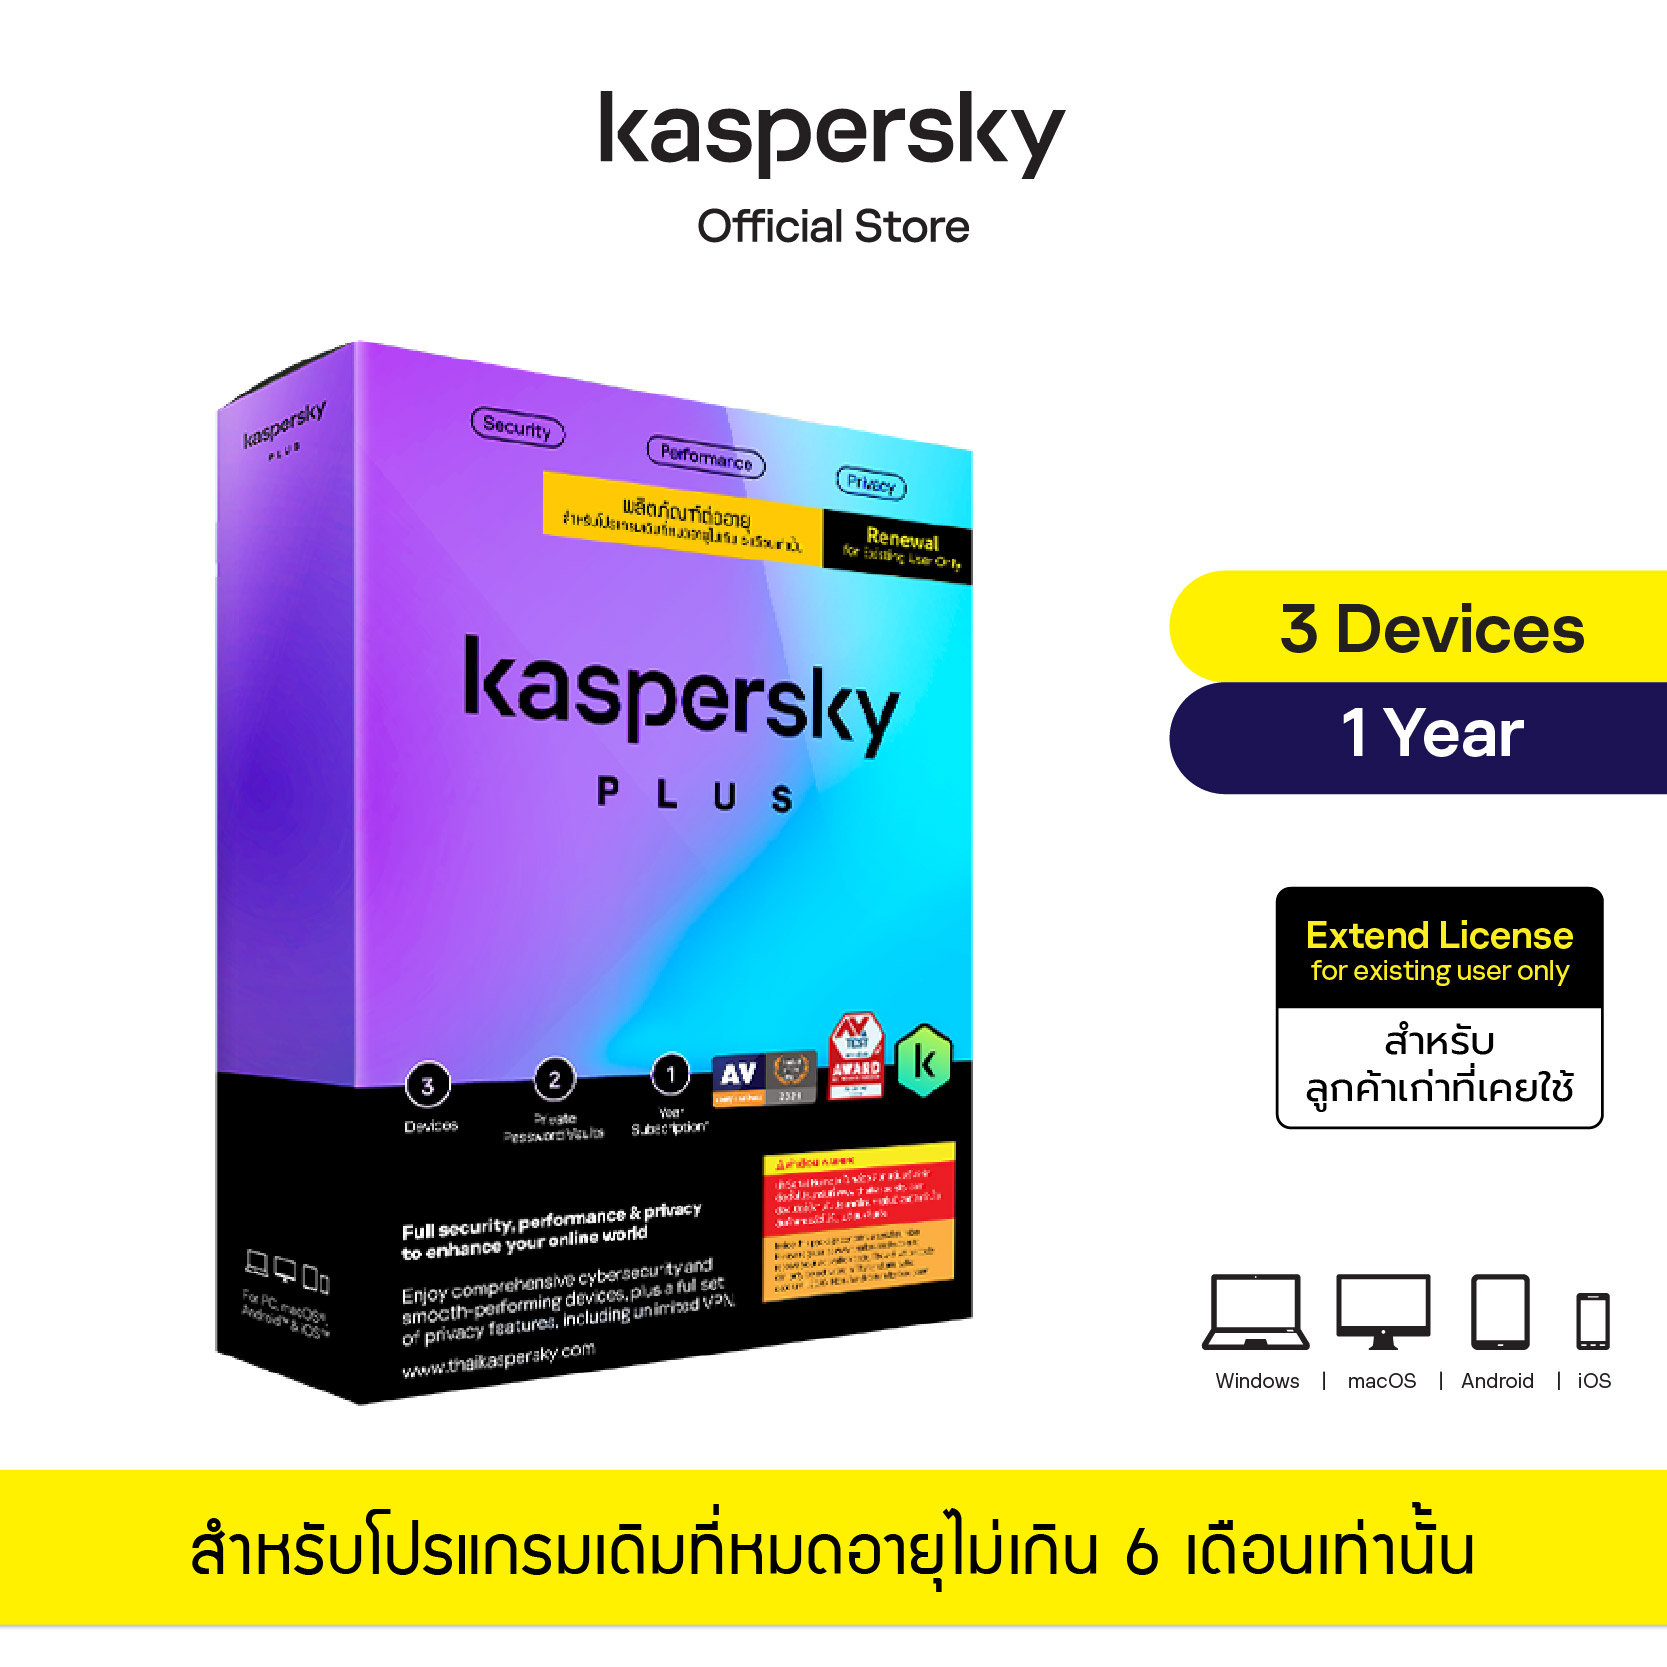 Kaspersky Plus 3 Devices 1 Year (Extend License)